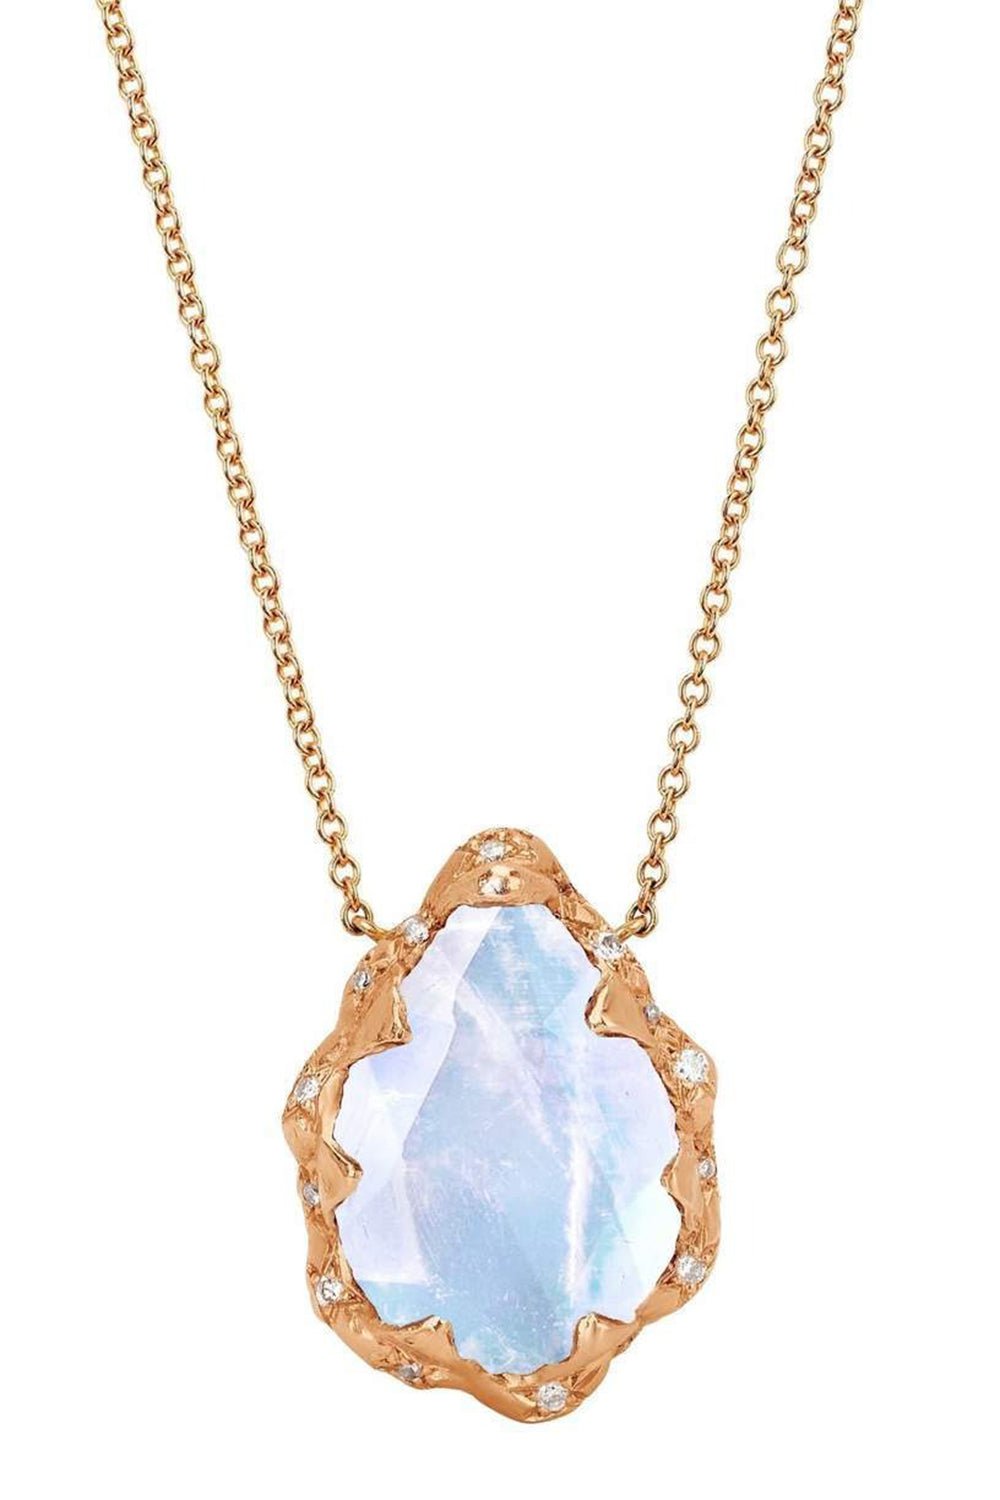 LOGAN HOLLOWELL-Queen Water Drop Moonstone Necklace with Sprinkled Diamonds-